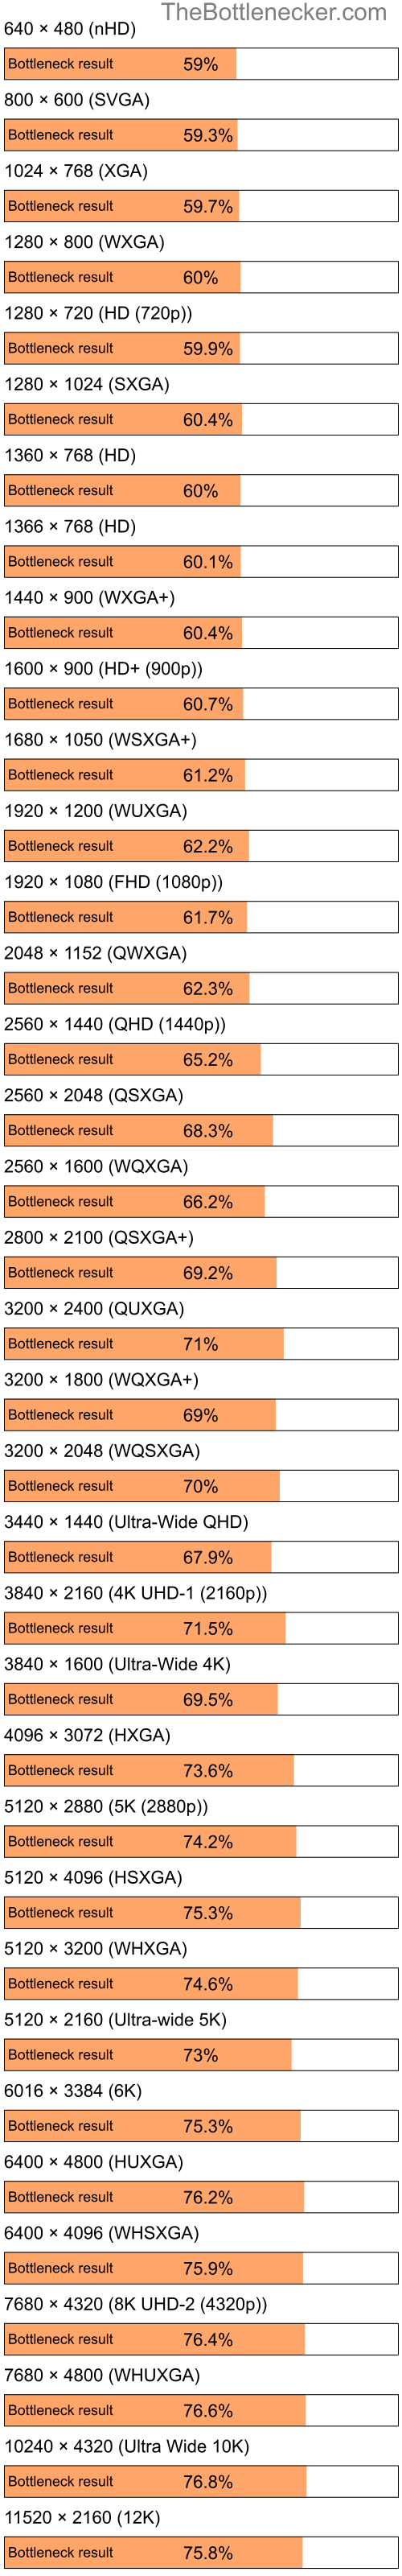 Bottleneck results by resolution for Intel Pentium 4 and AMD Radeon 3000 in General Tasks